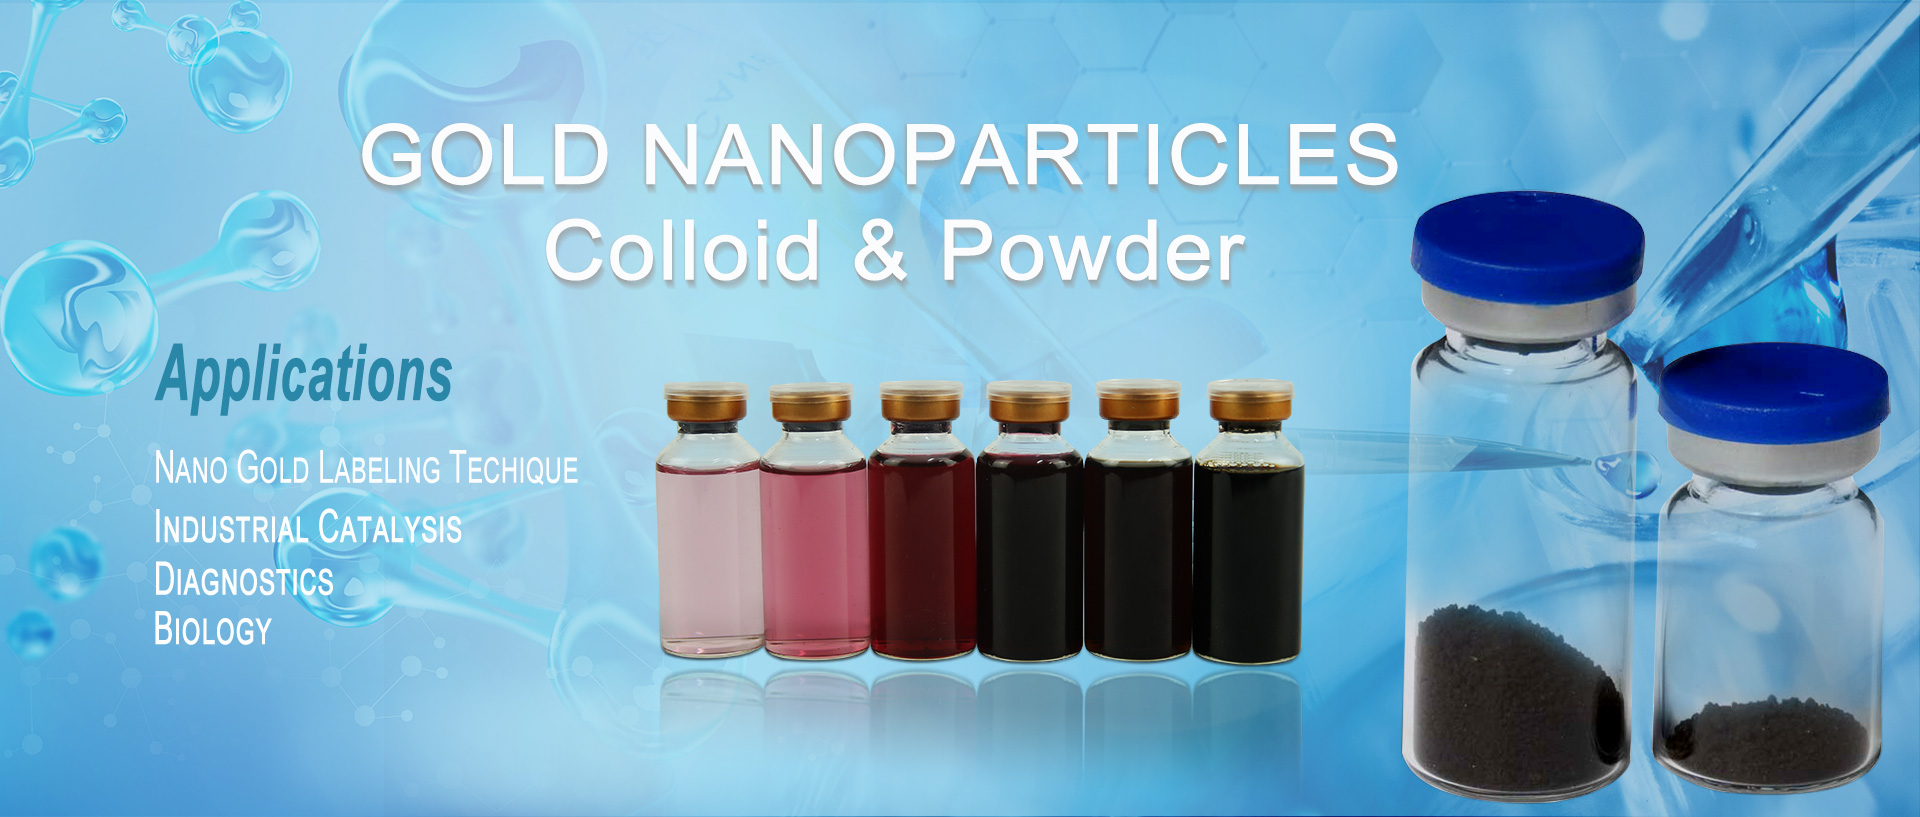 gold nanoparticles